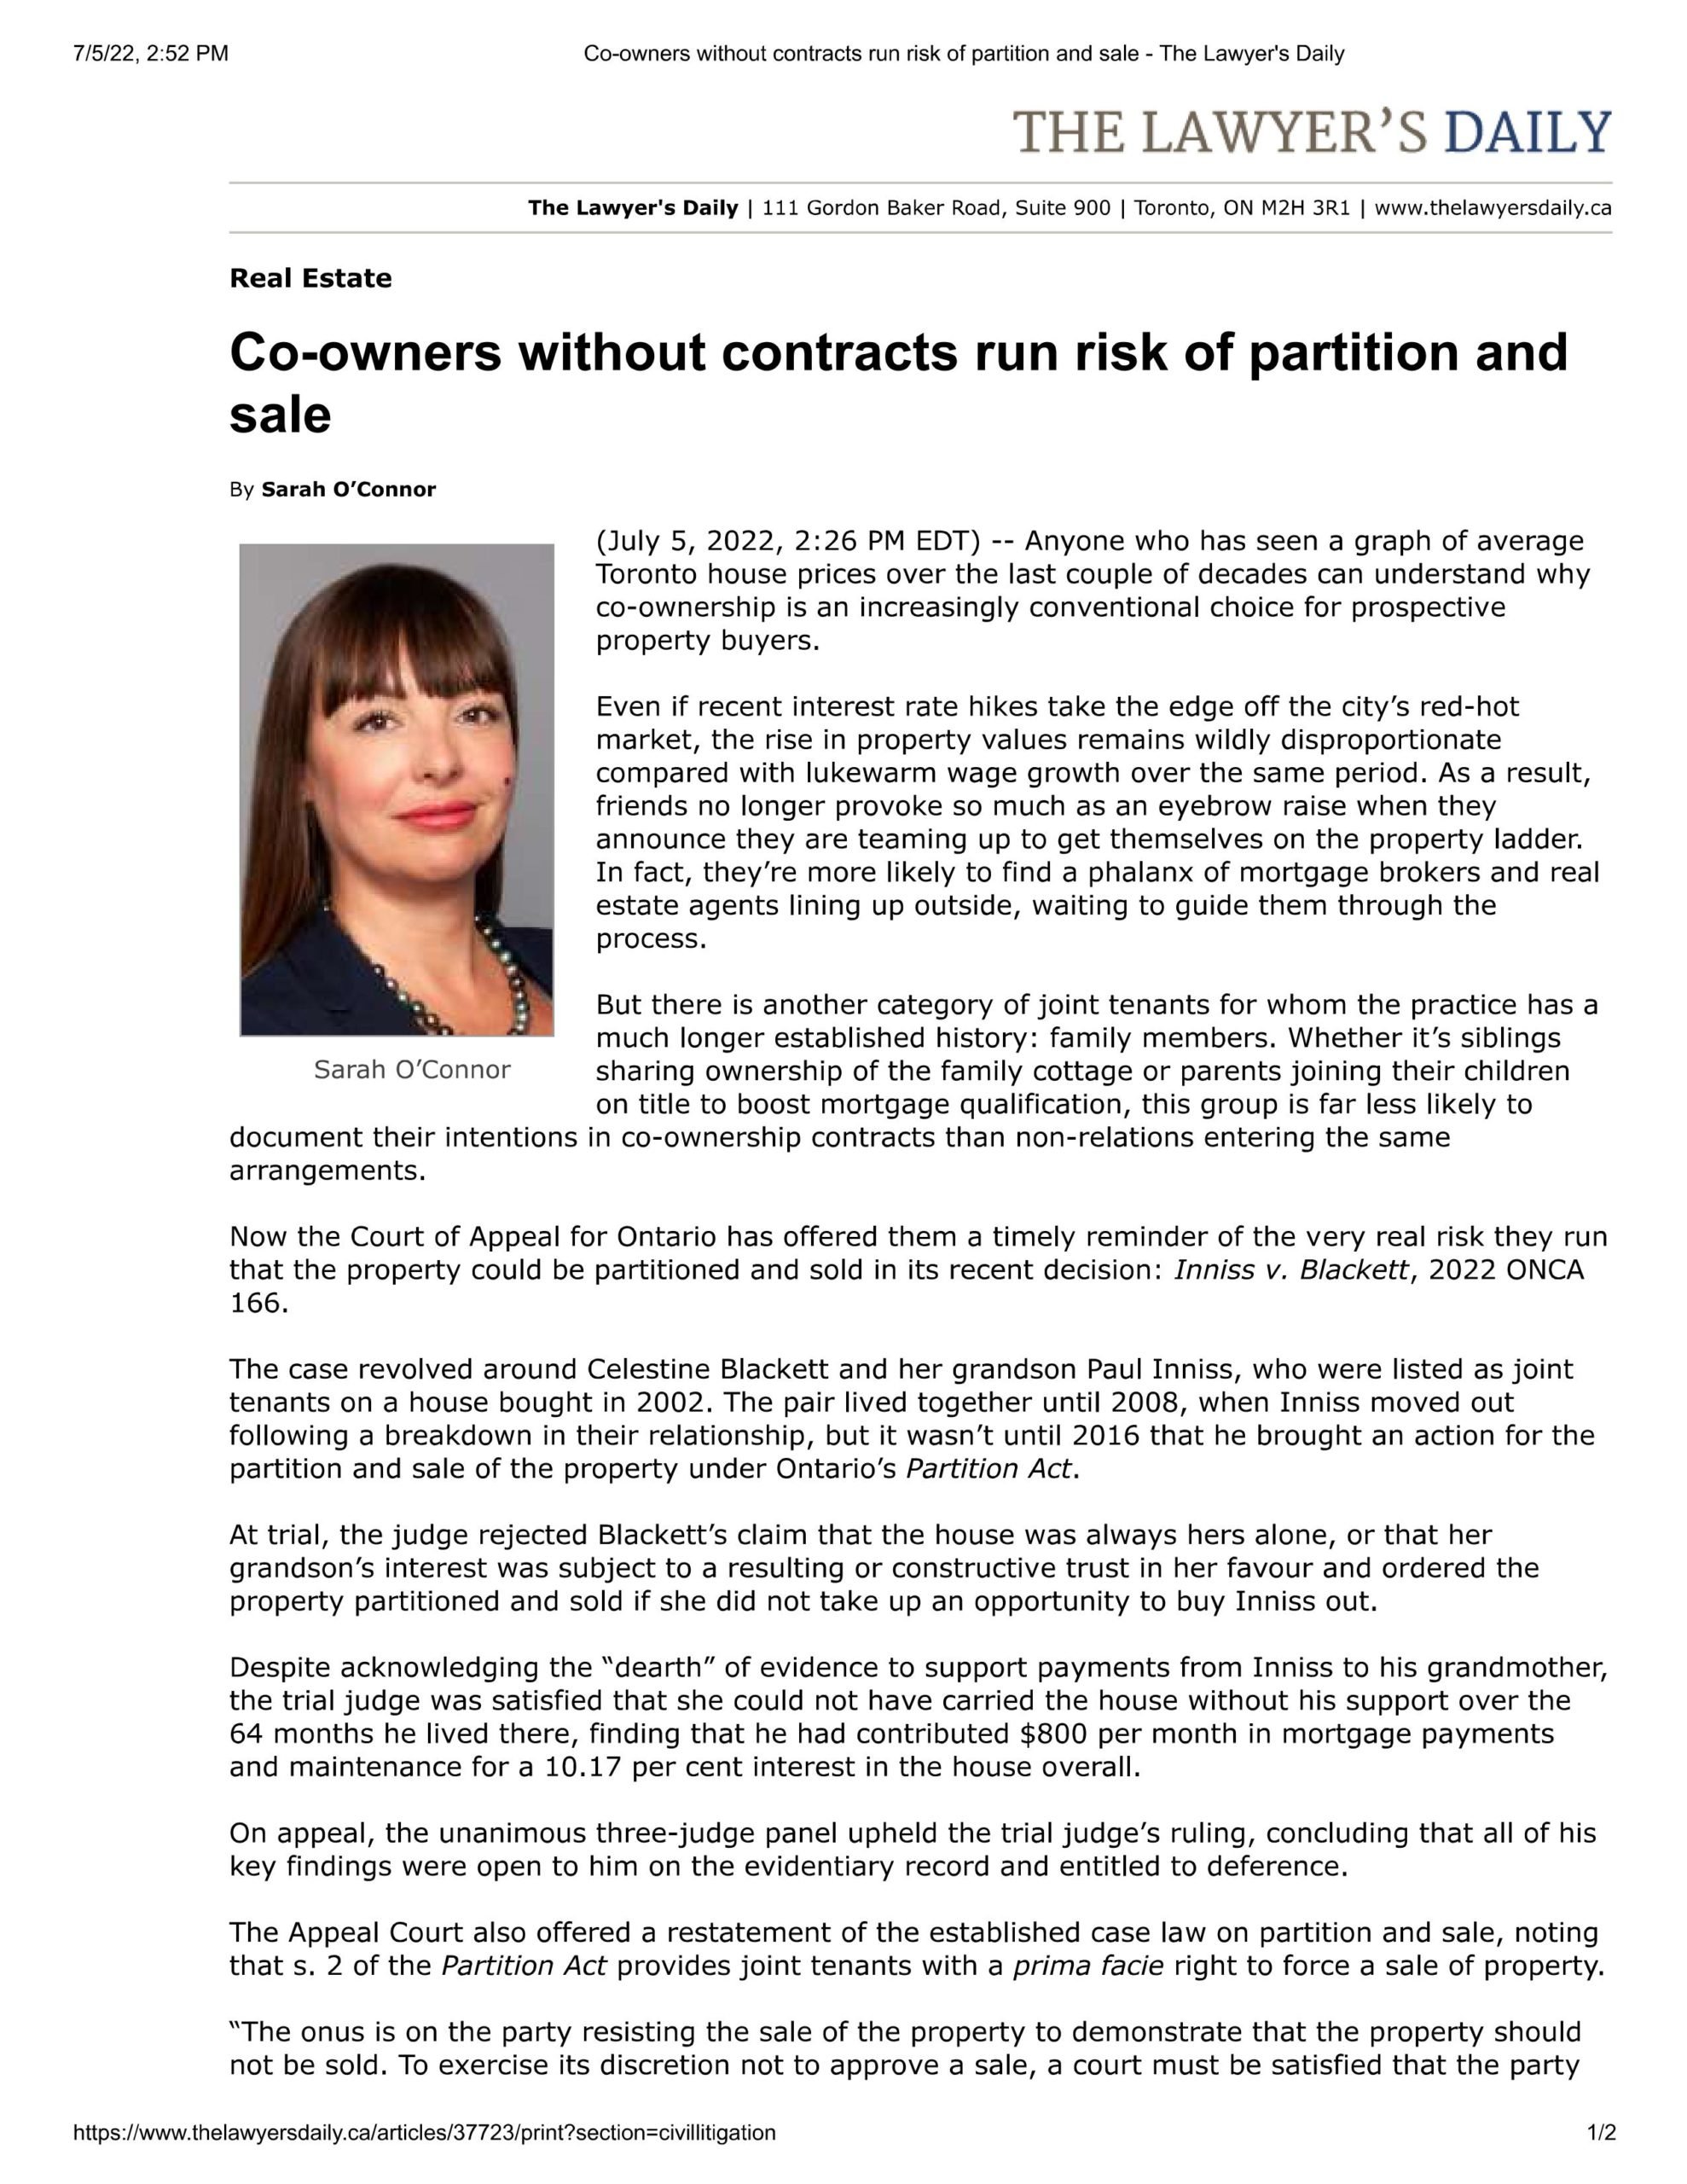  Photo of Sarah O’Connor | Co-owners Without Contracts Run Risk Of Partition And Sale-The Lawyer's Daily